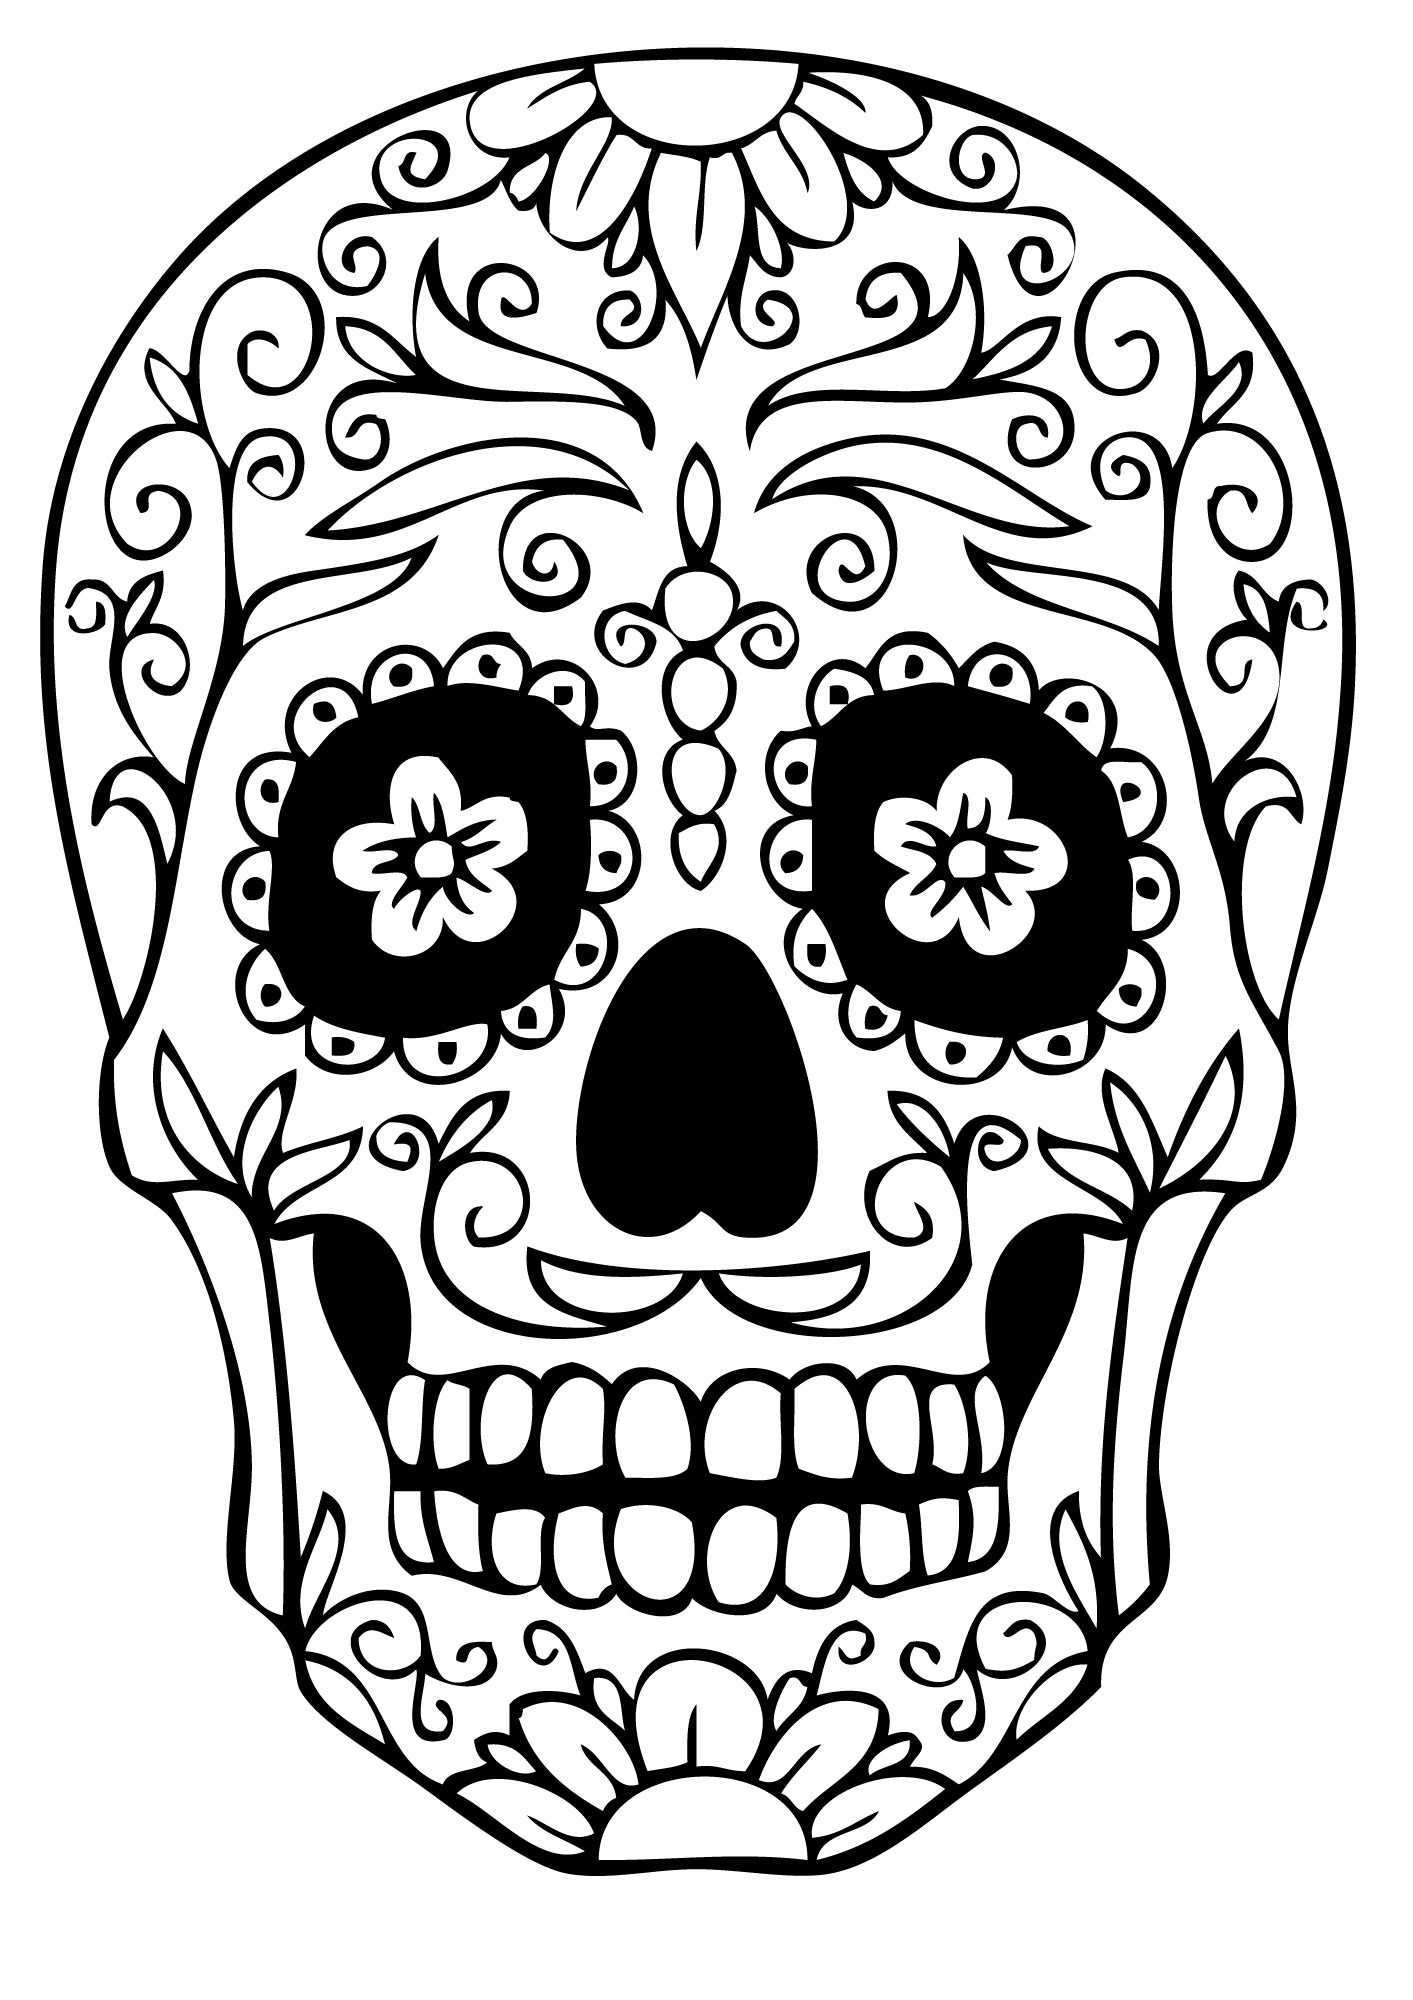 Coloring Pages Sugar Skull Coloring Pages Pics Images Pictures Etc Jpg 1413 2000 Skull Coloring Pages Sugar Skull Drawing Skull Template